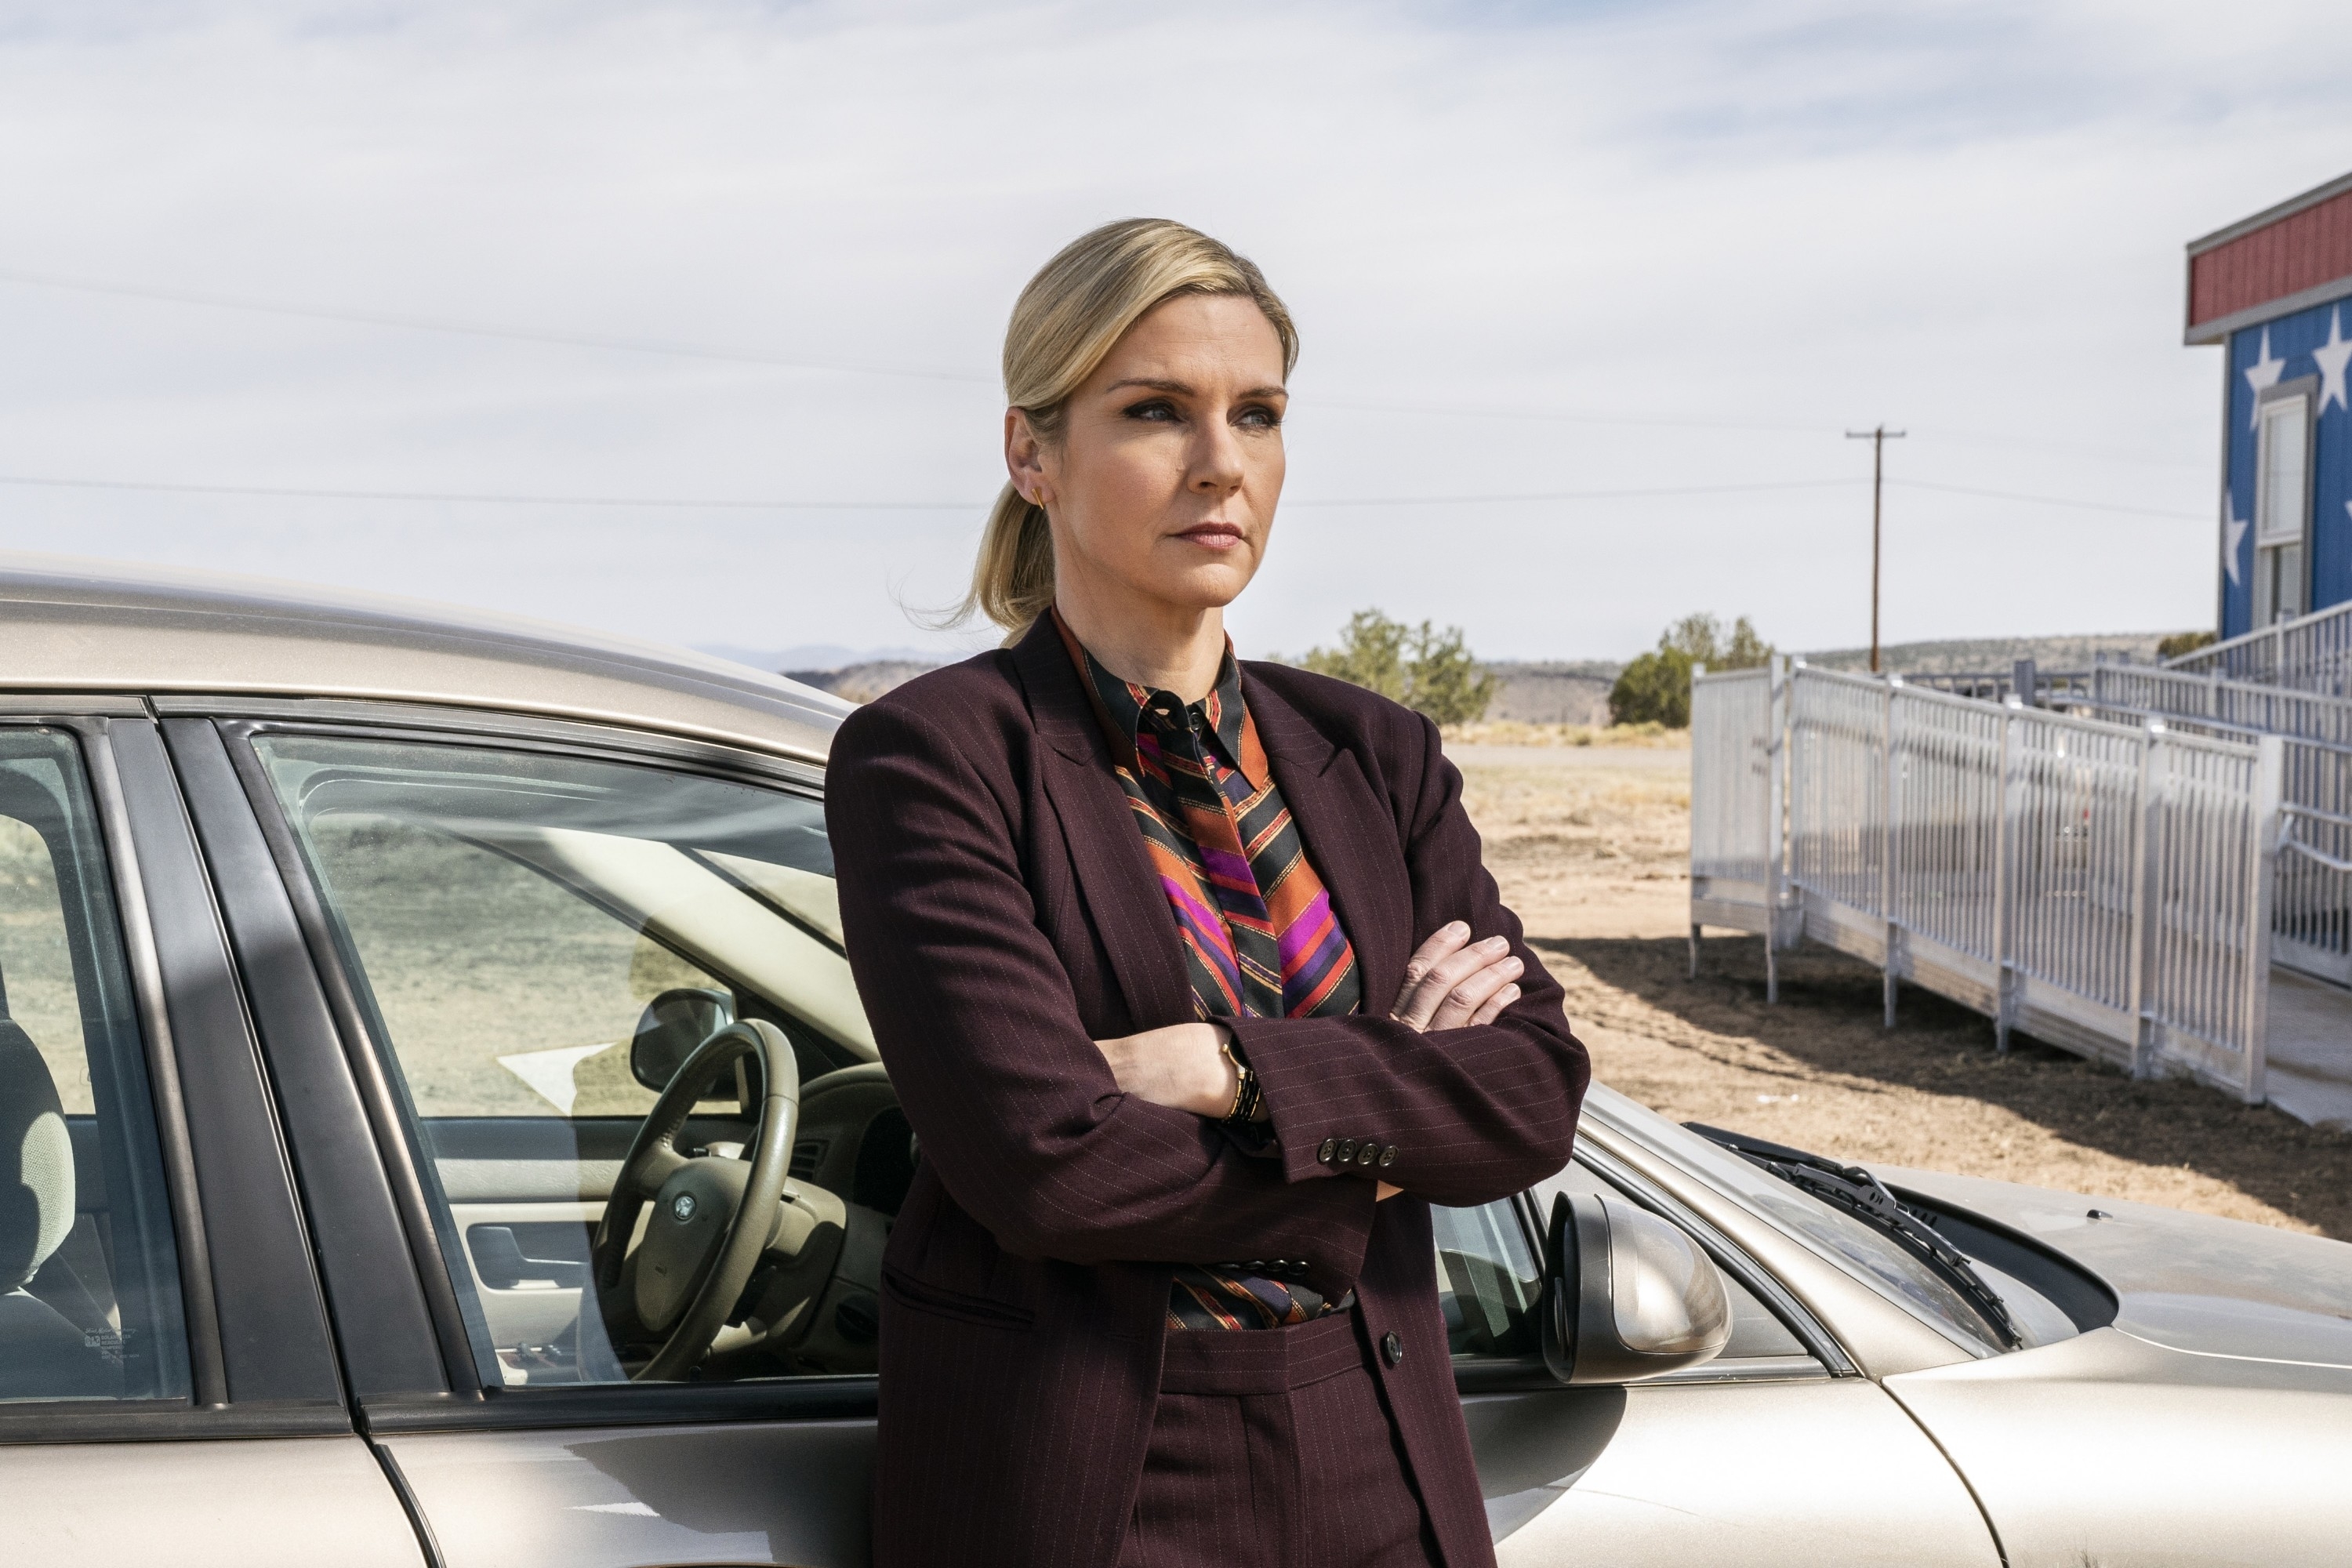 Woman in a business outfit standing by a car with arms crossed